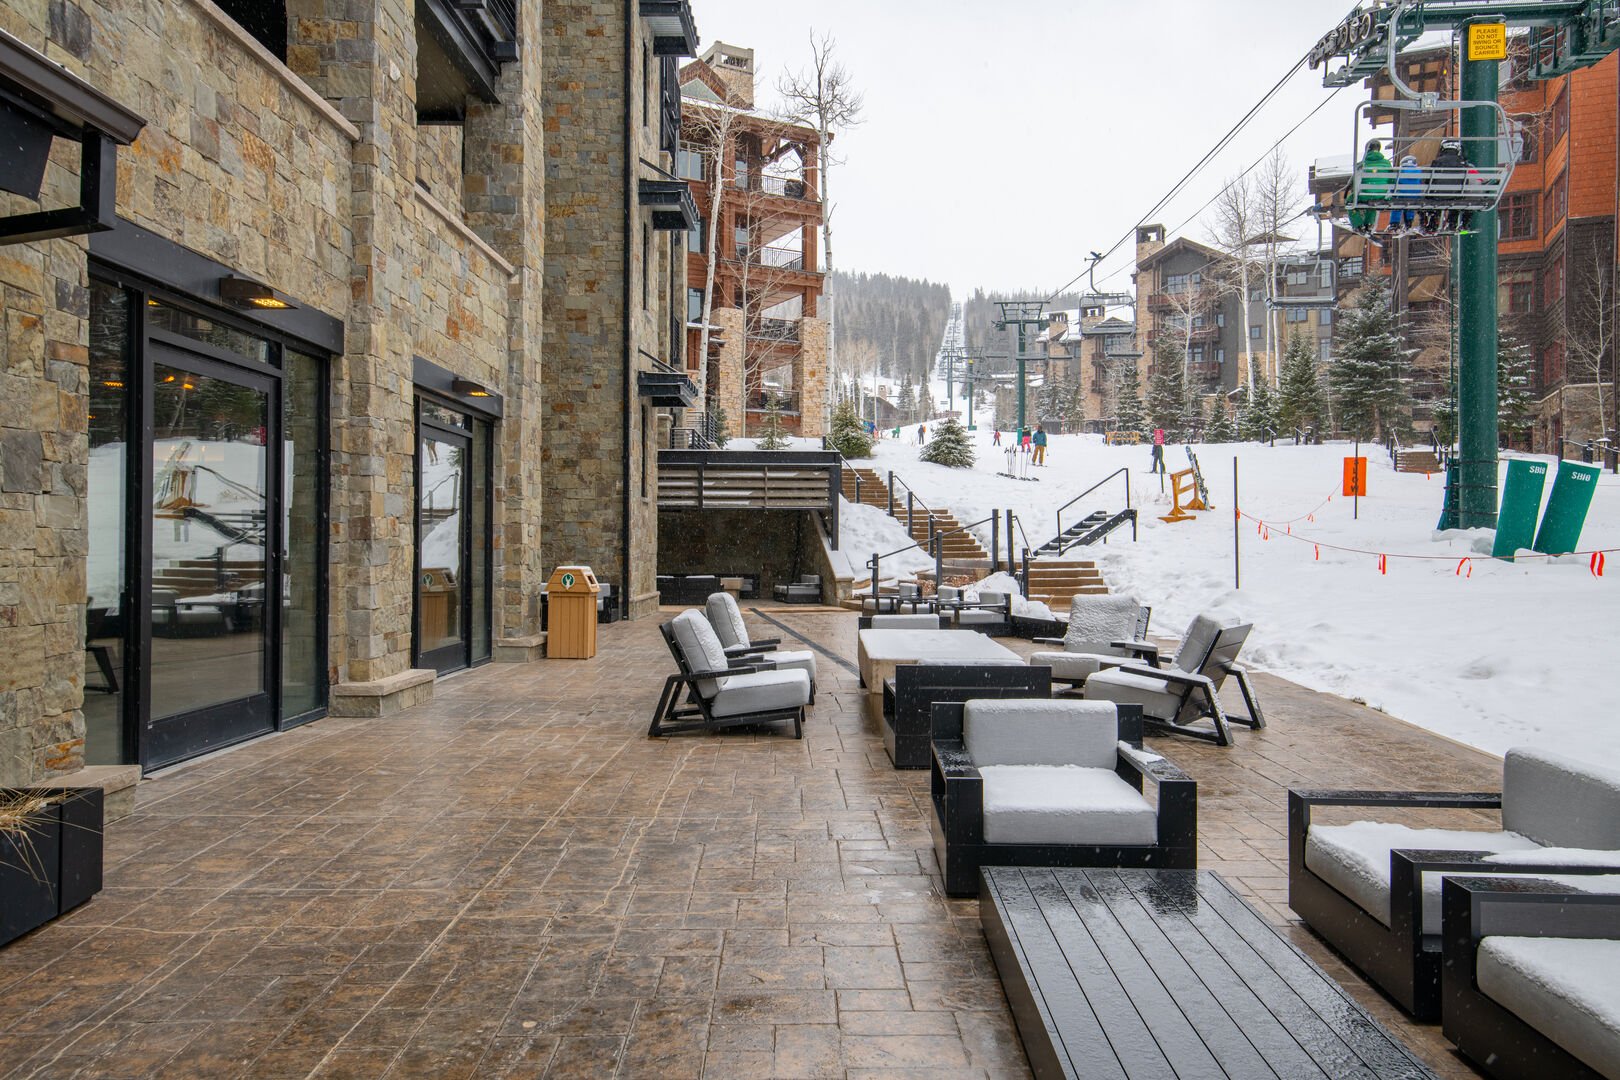 Ski beach patio with outdoor firepits.